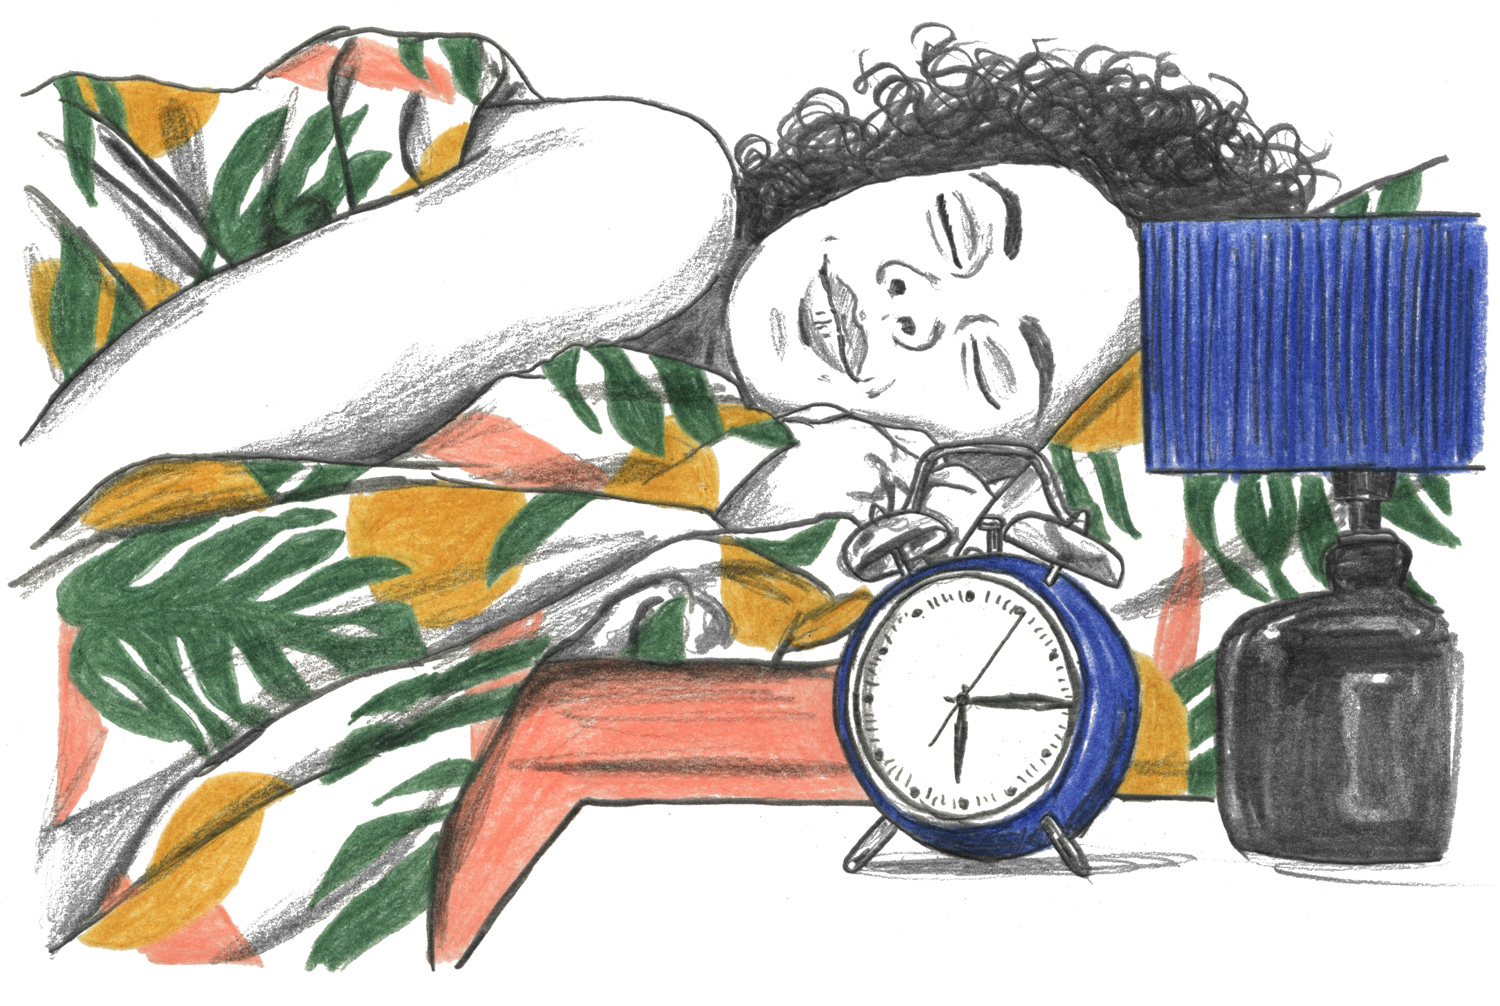 Coloured graphite drawing of a woman asleep in bed under a green and yellow leaf-patterned blanket, next to a blue alarm clock and a blue-shaded lamp.